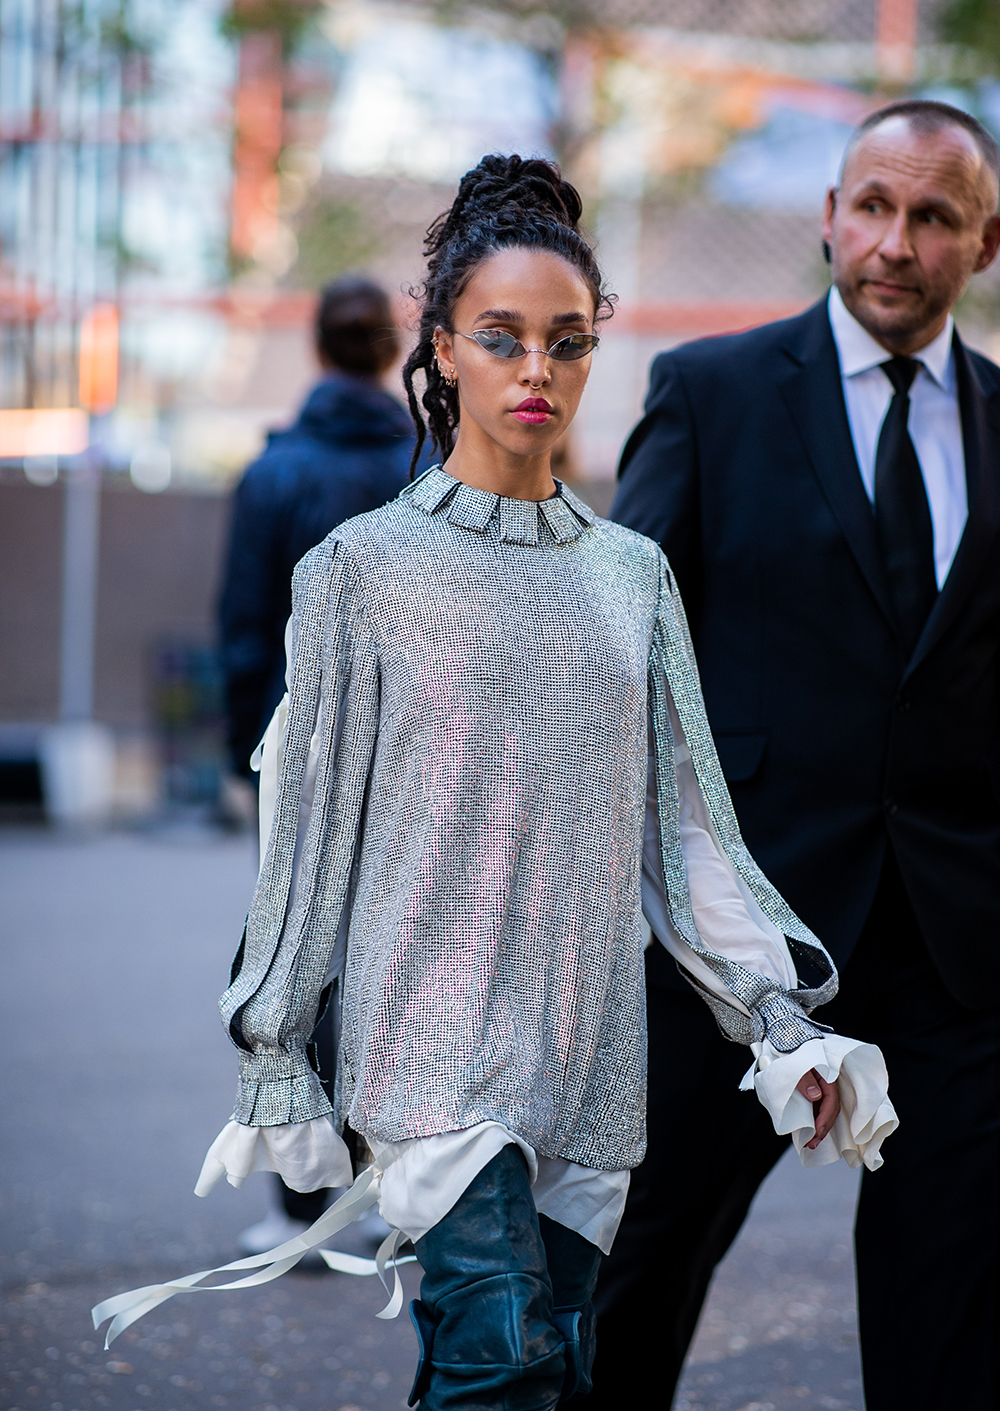 LONDON, ENGLAND - SEPTEMBER 17: FKA twigs is seen outside Christopher Kane during London Fashion Week September 2018 on September 17, 2018 in London, England. (Photo by Christian Vierig/Getty Images)